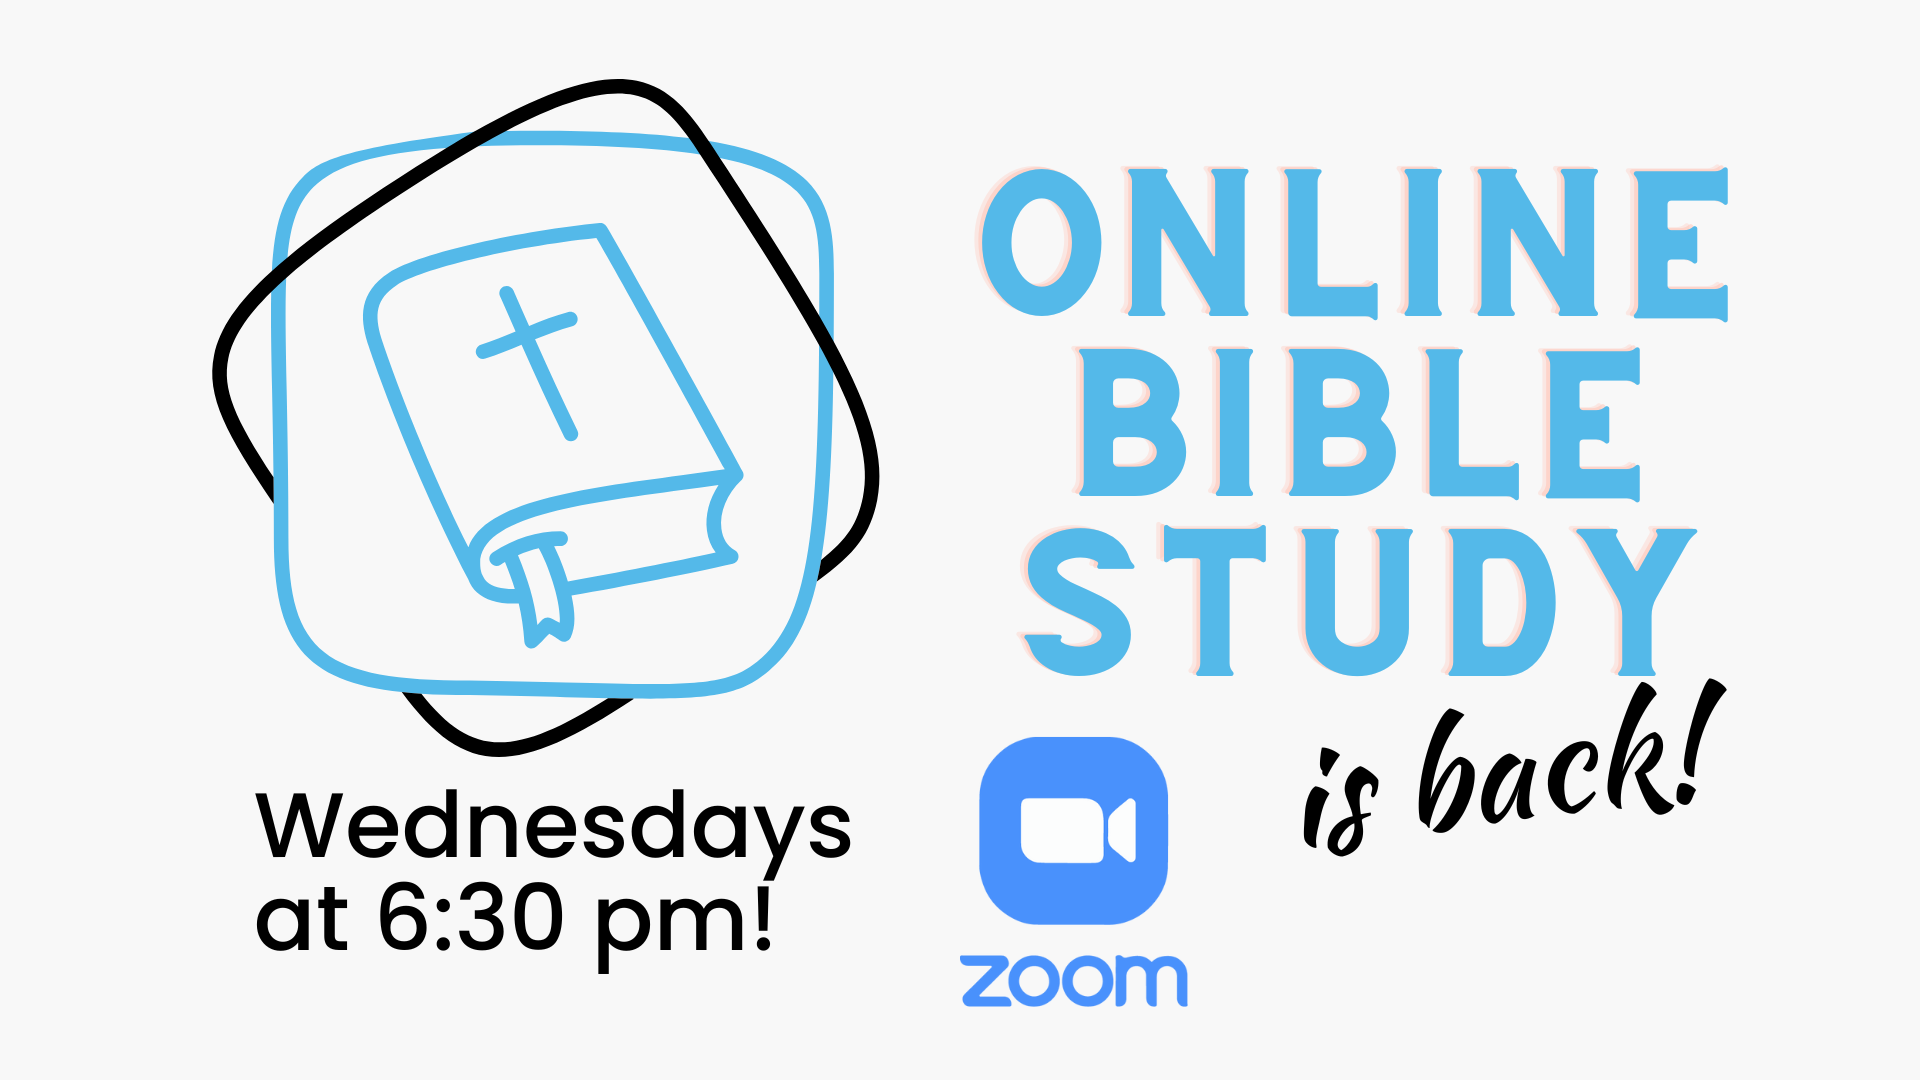 Online Bible Study is Back